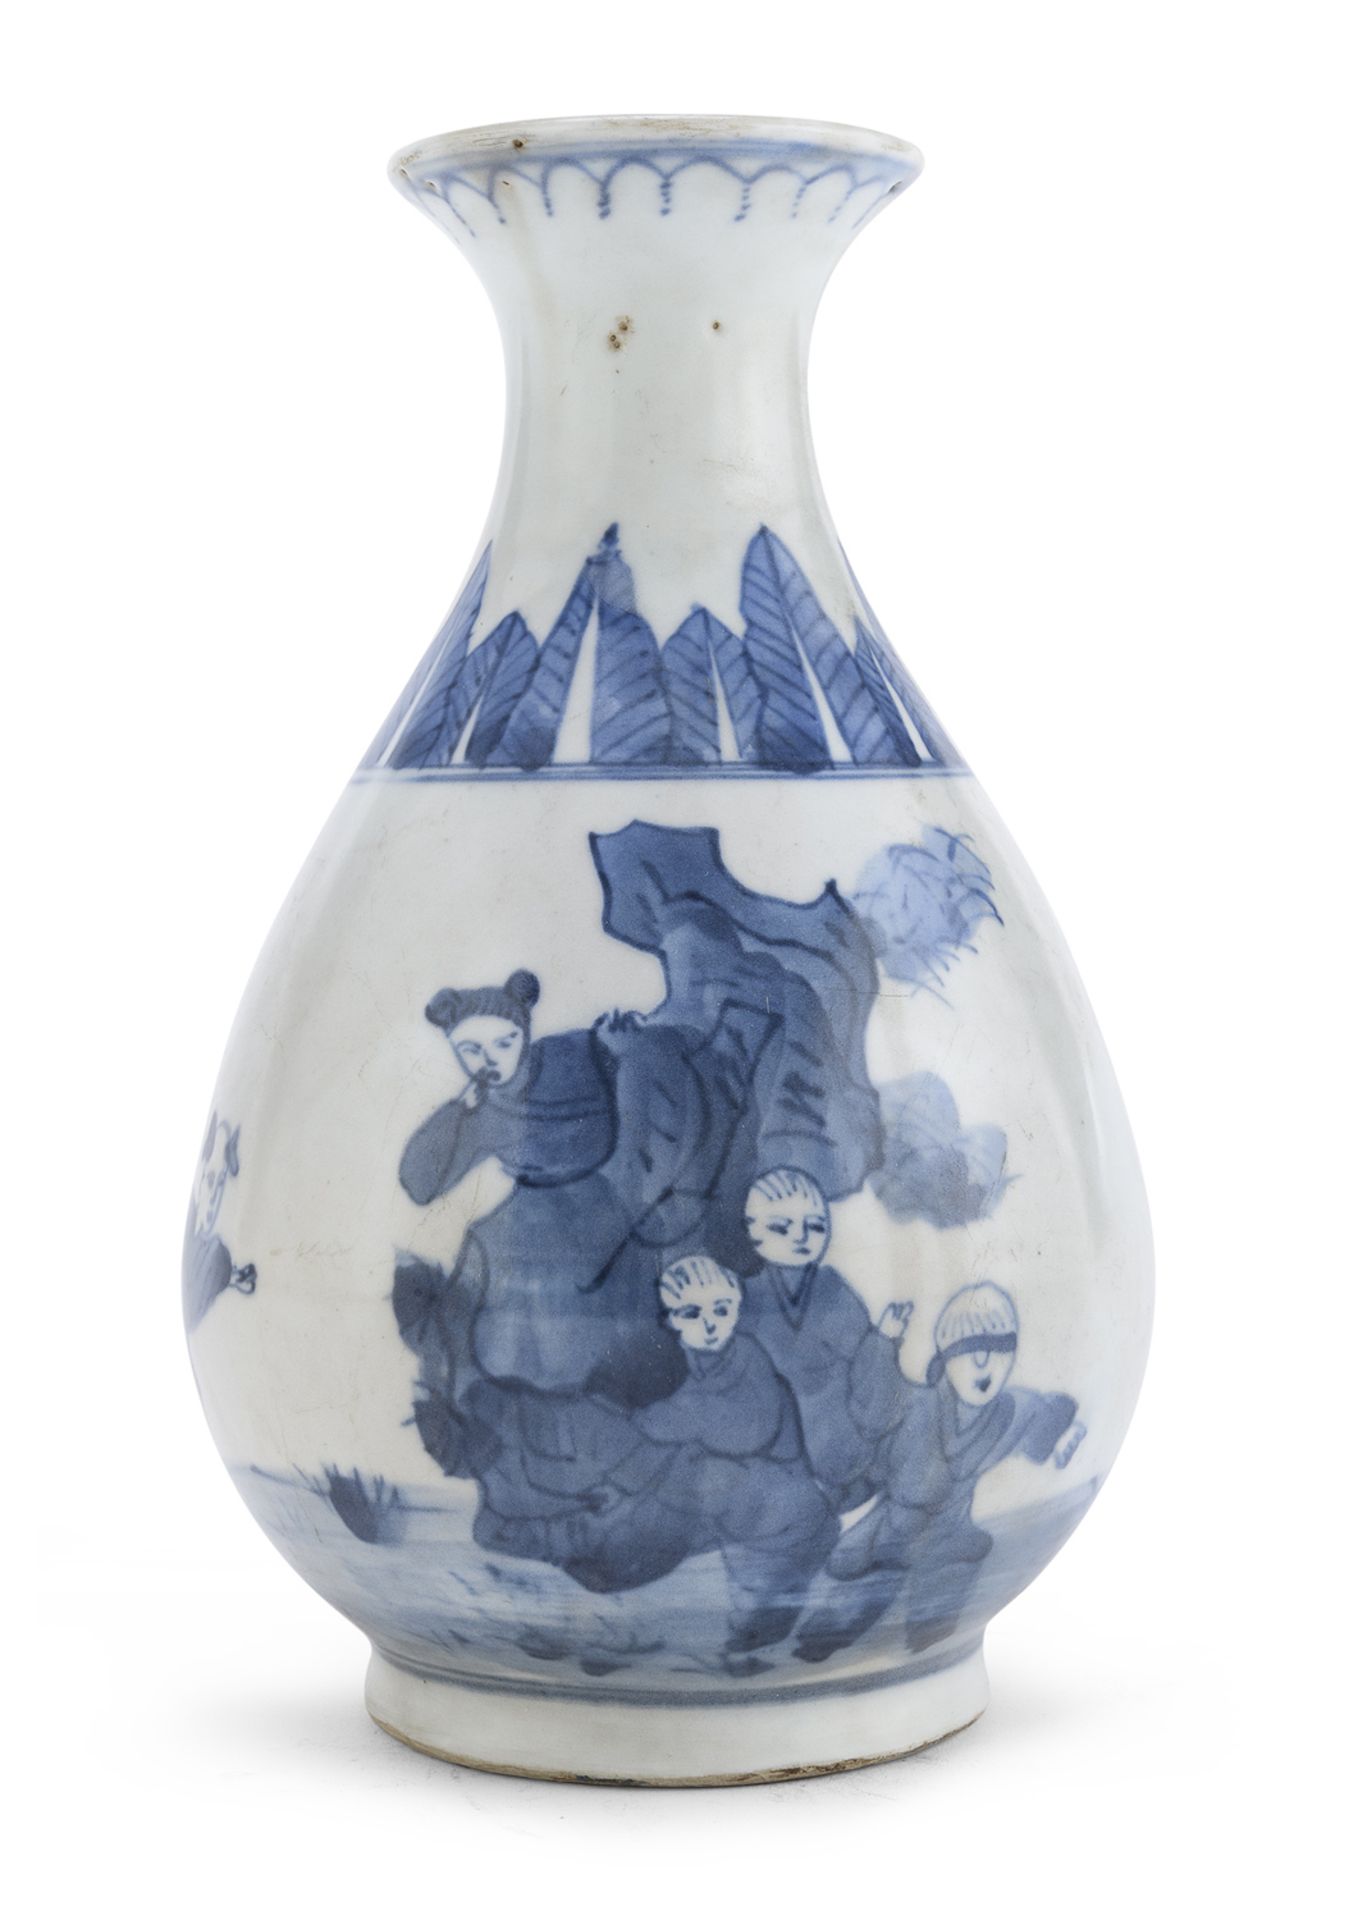 A CHINESE WHITE AND BLUE PORCELAIN VASE 20TH CENTURY.